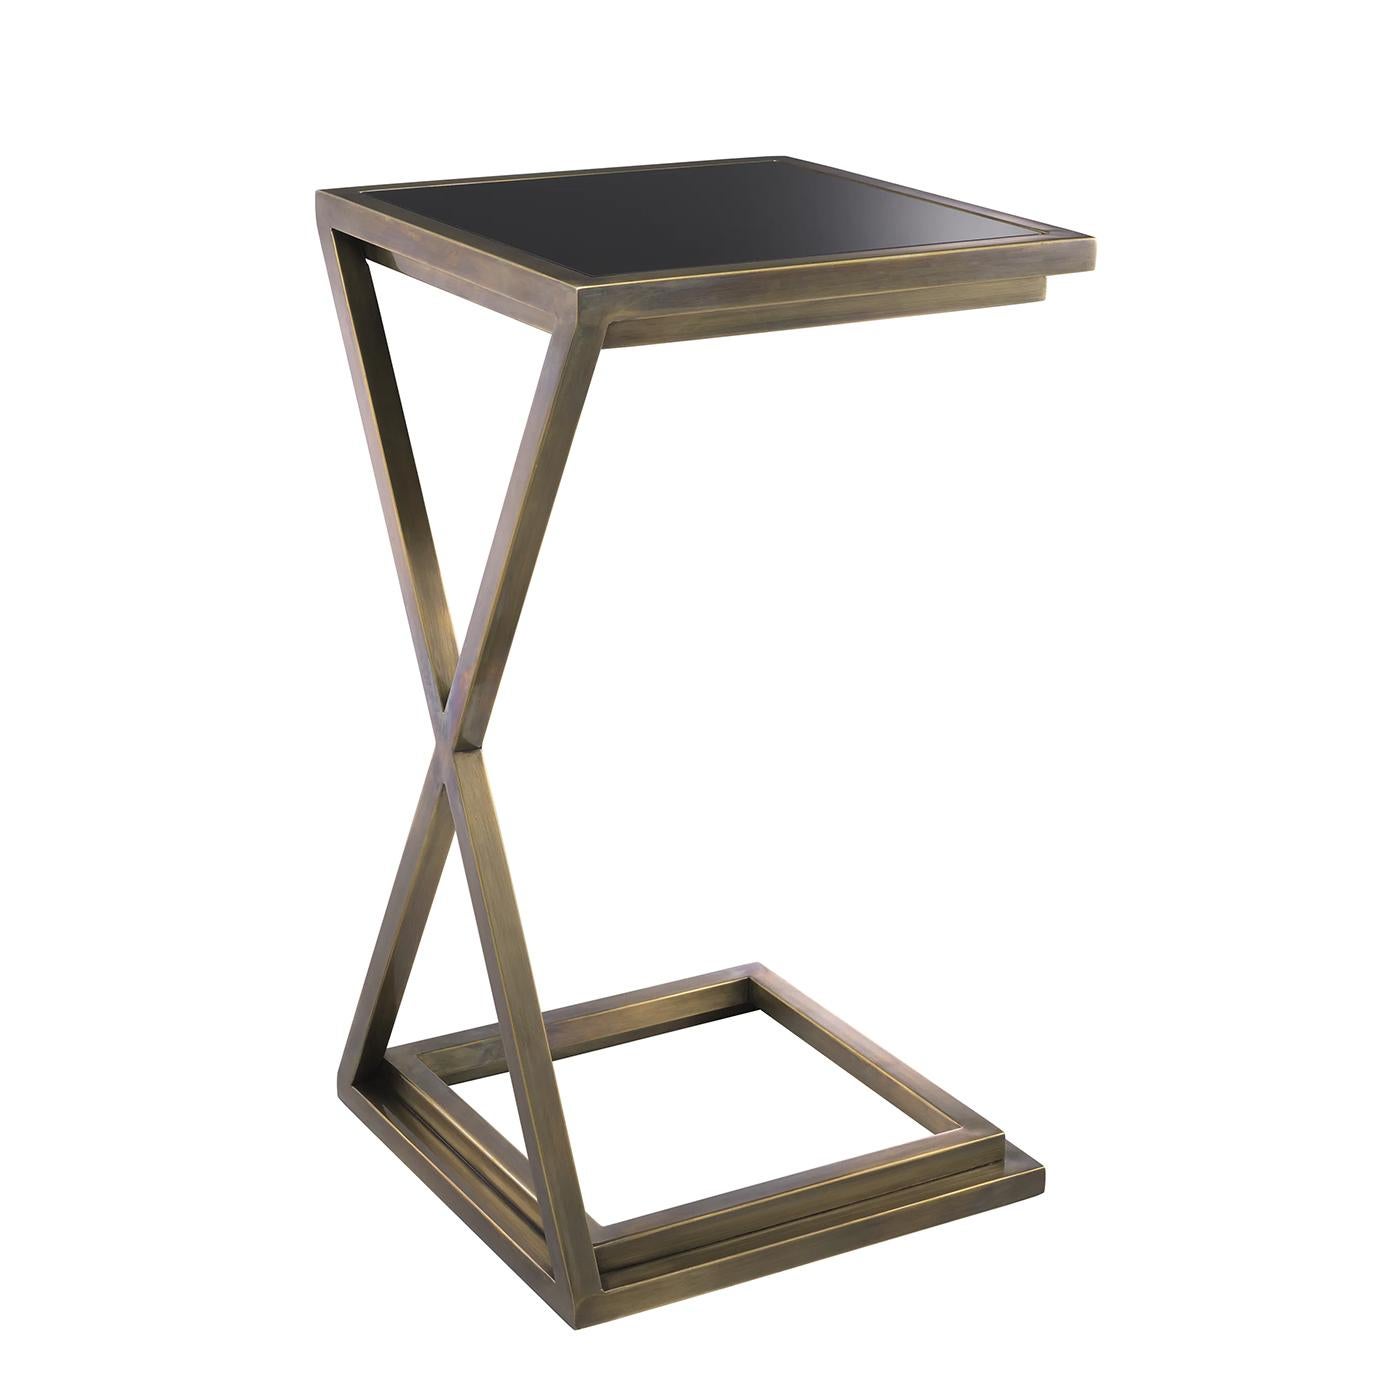 Side table Romy brass with all structure in stainless
steel in vintage brass finish, with blackened glass top.